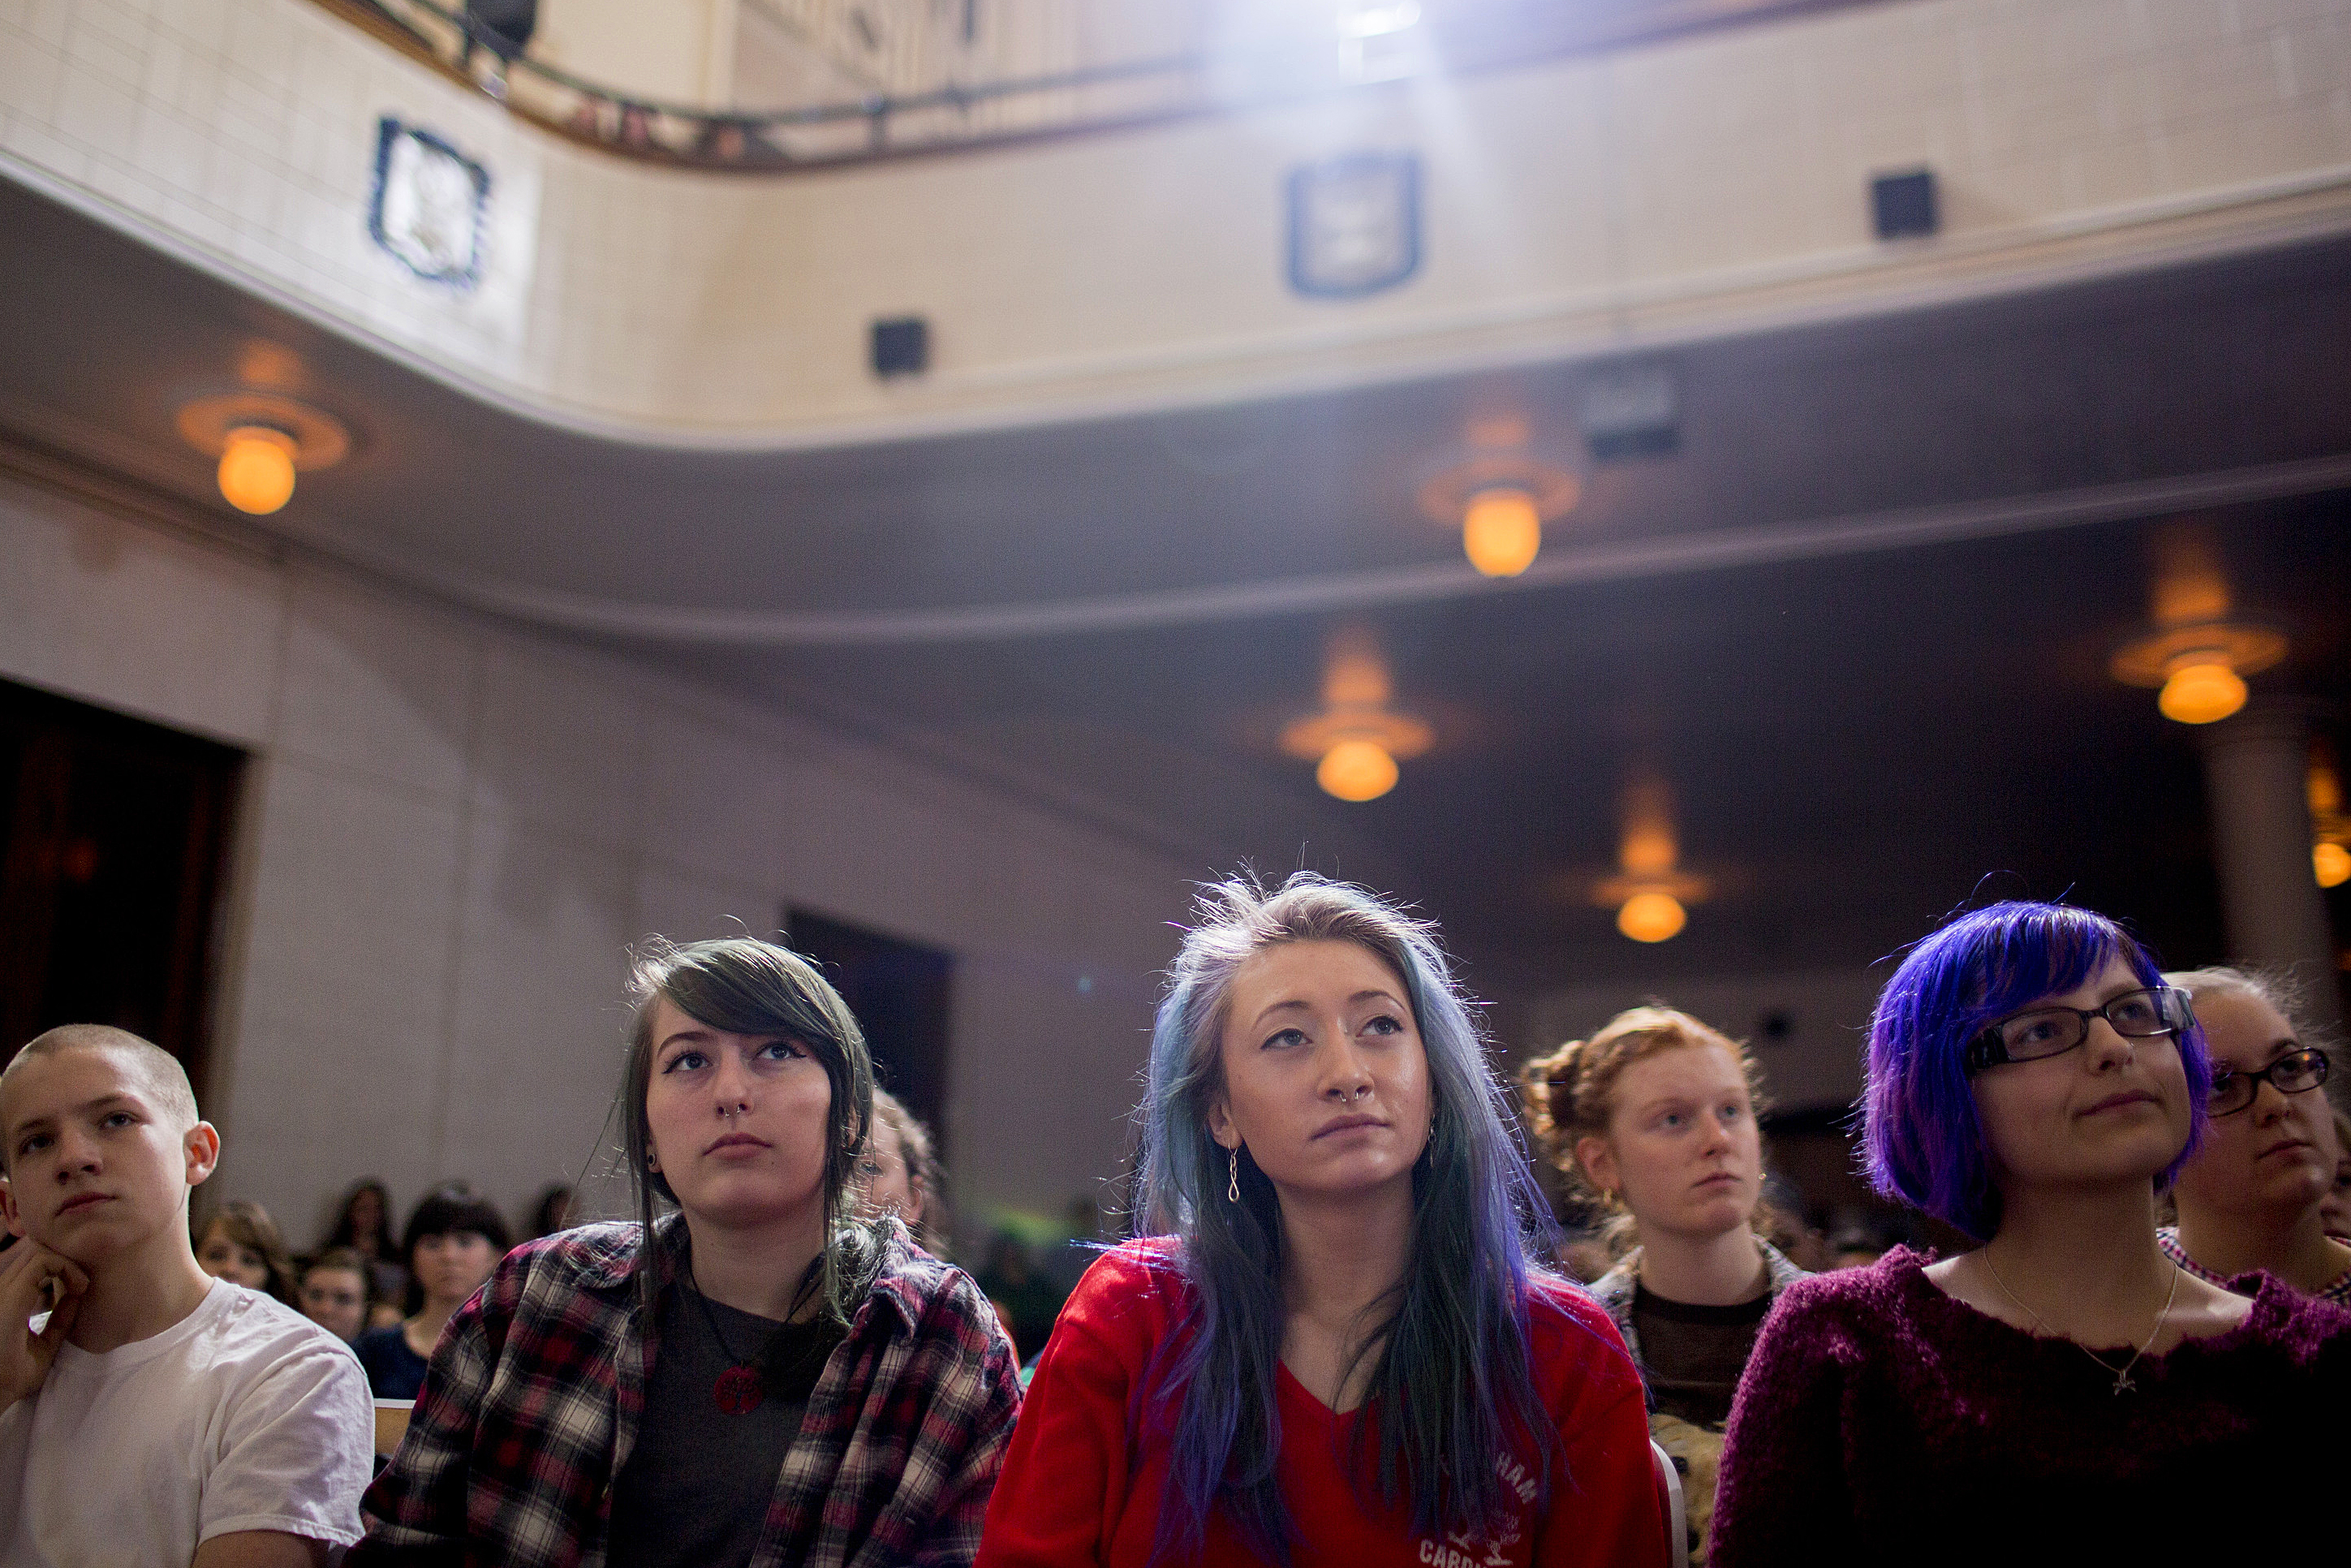 Attendees at a Bernie Sanders campaign event in Des Moines, Iowa on Jan. 28, 2016. (Natalie Keyssar for TIME)